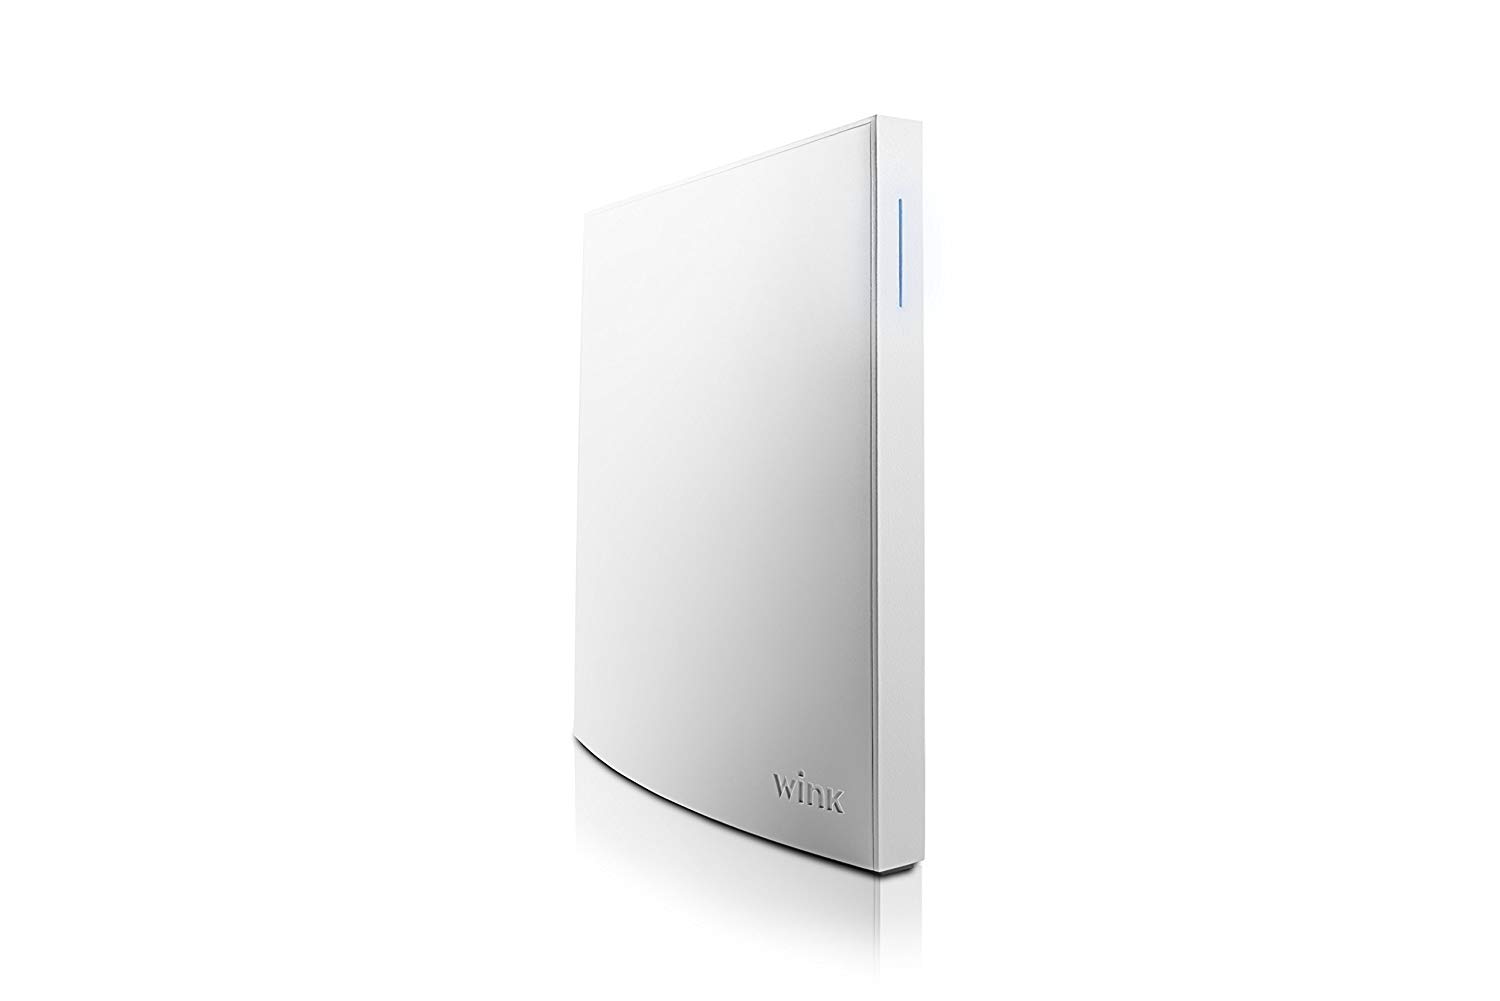 An image of the Wink Hub 2 smart home automation hub.